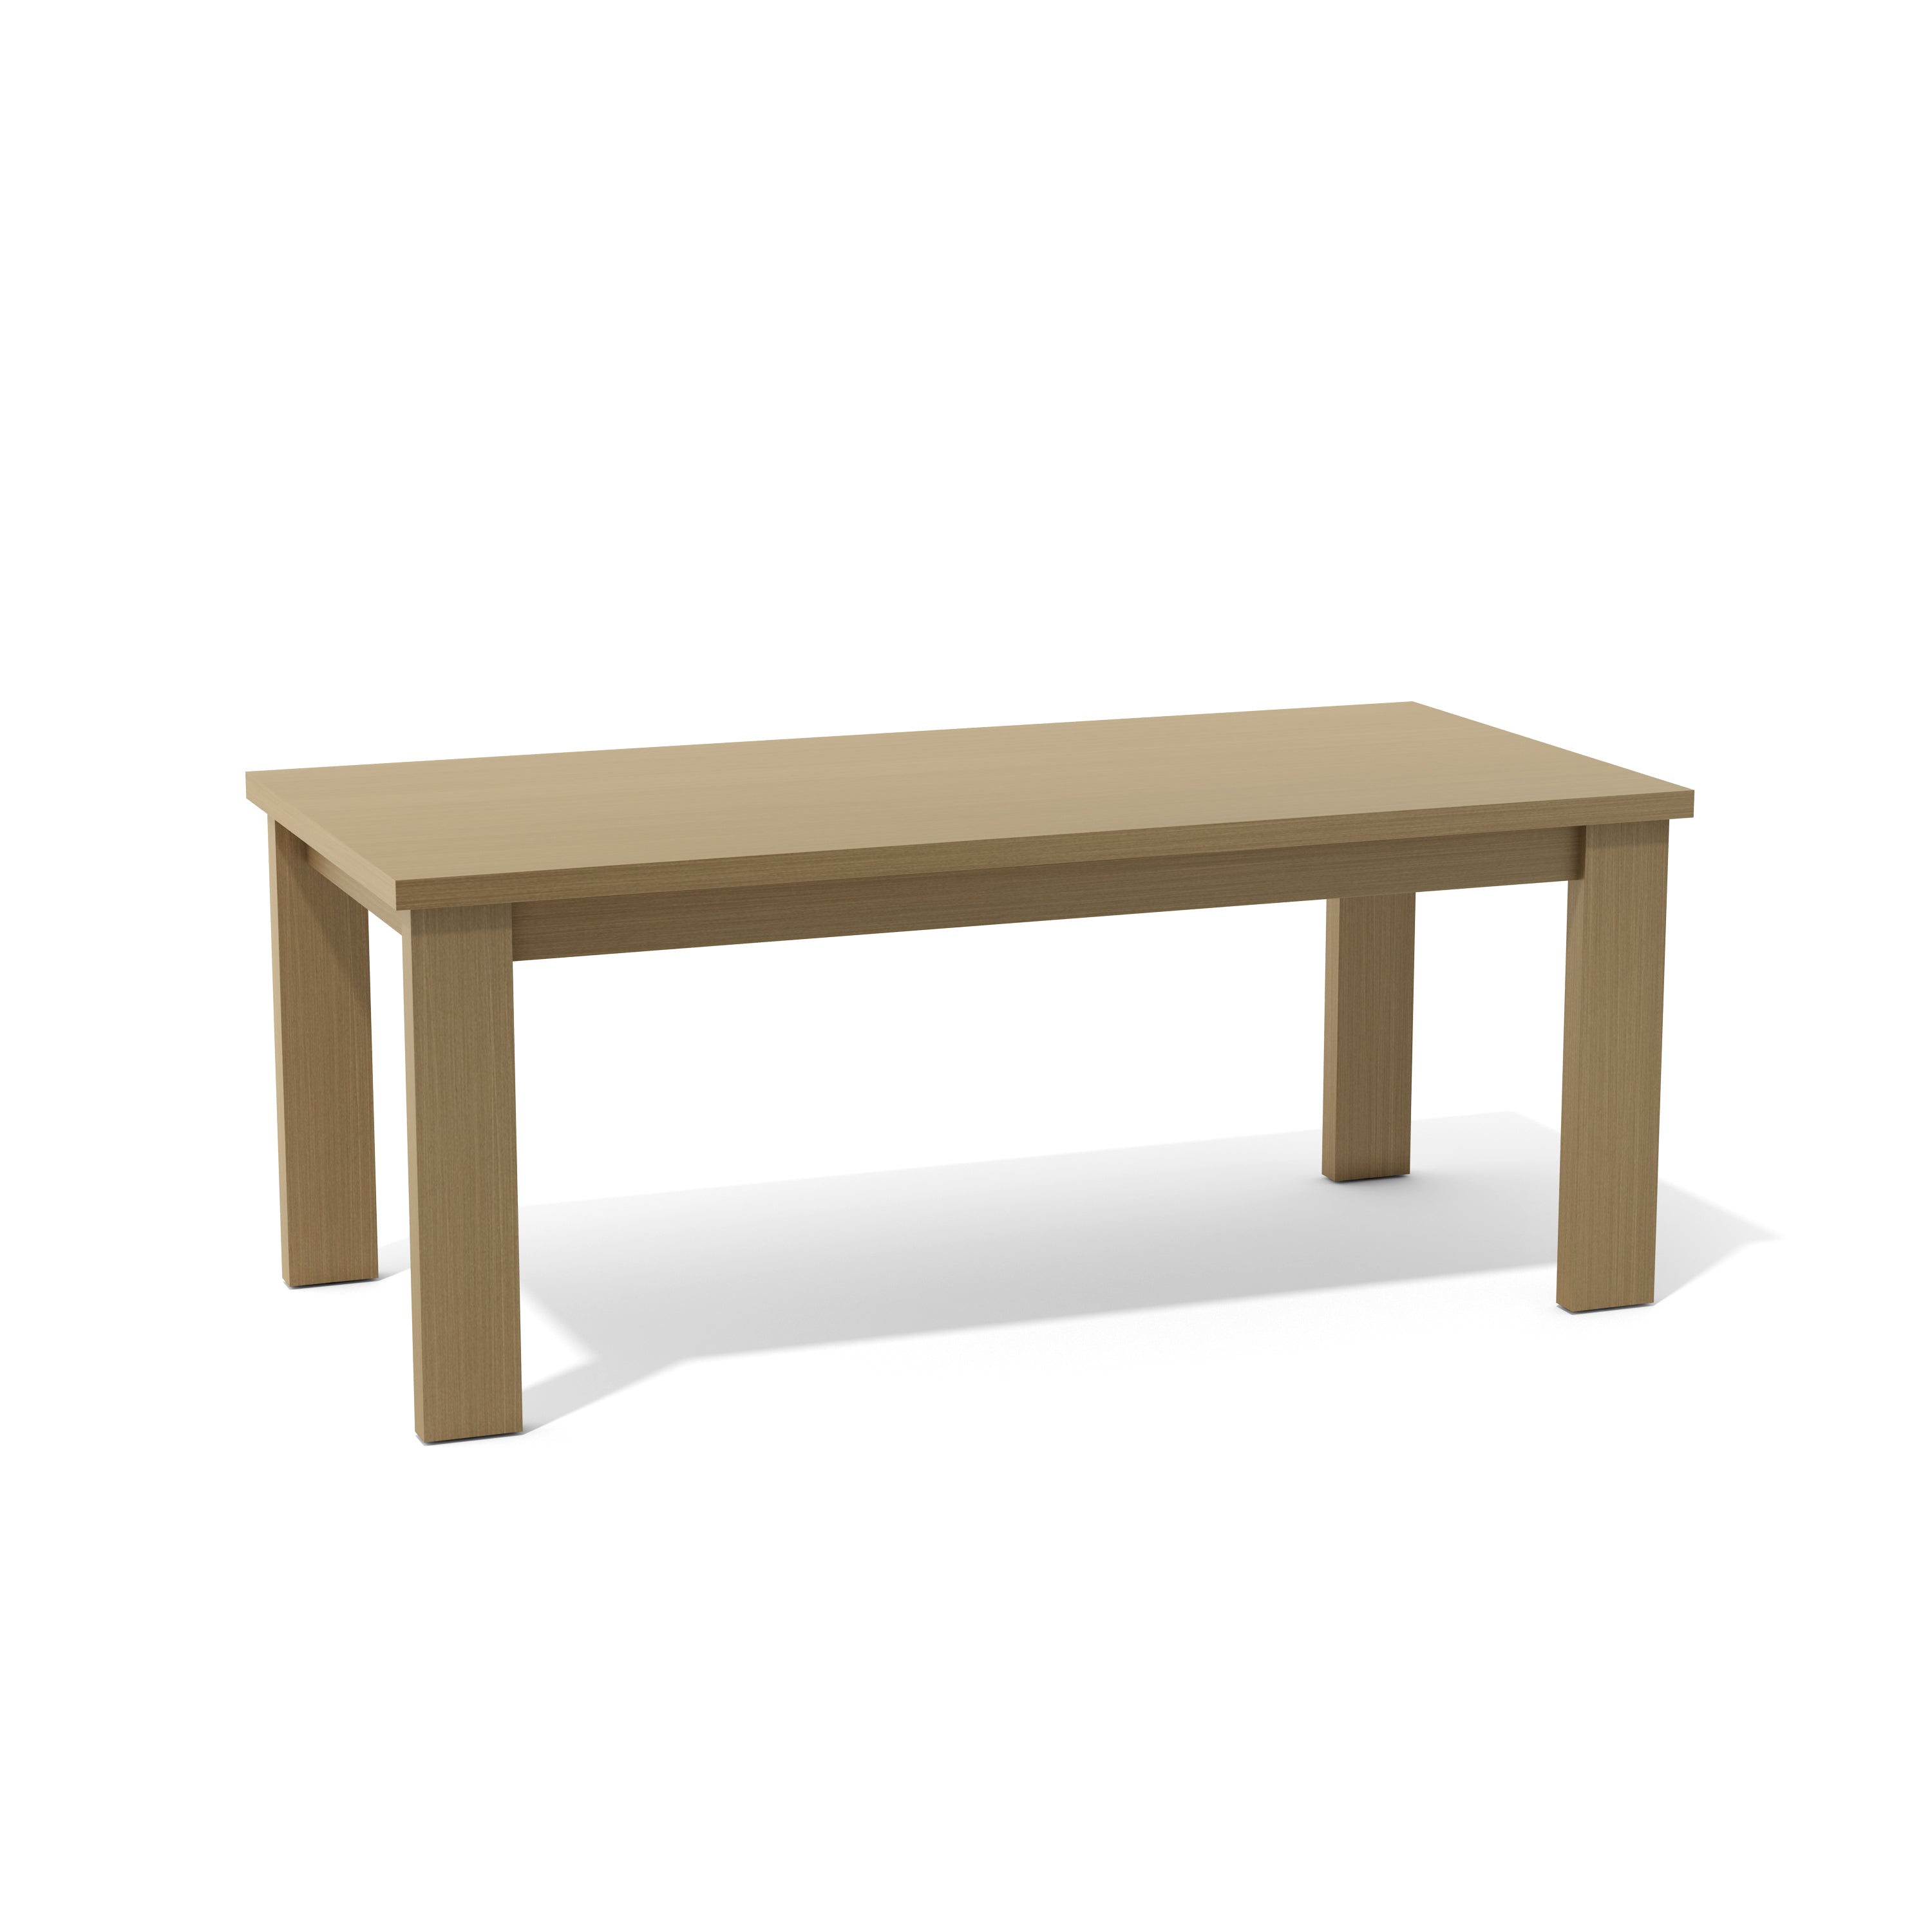 Anderson teak solid wood dining table